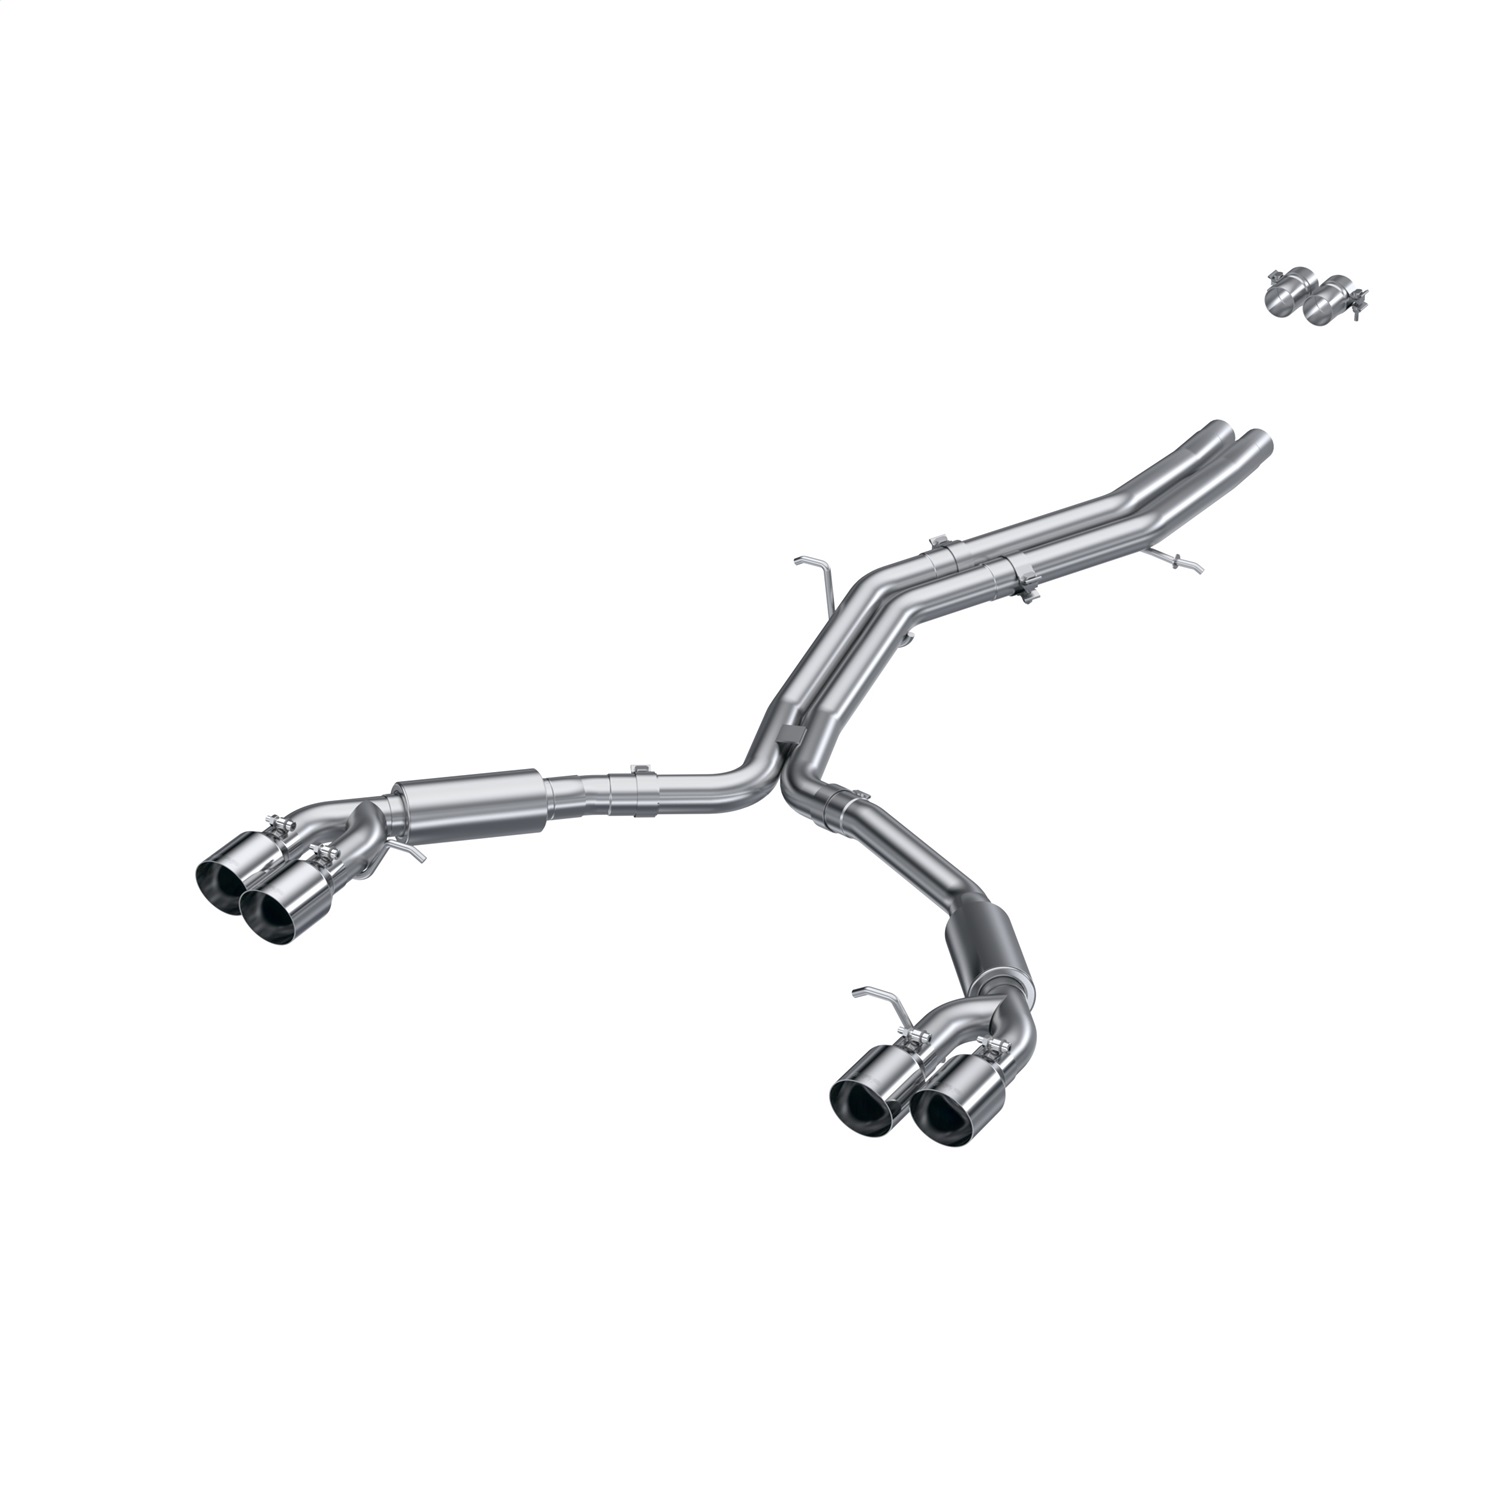 MBRP Exhaust S4607304 Armor Pro Cat Back Exhaust System Fits 18-24 S4 S5